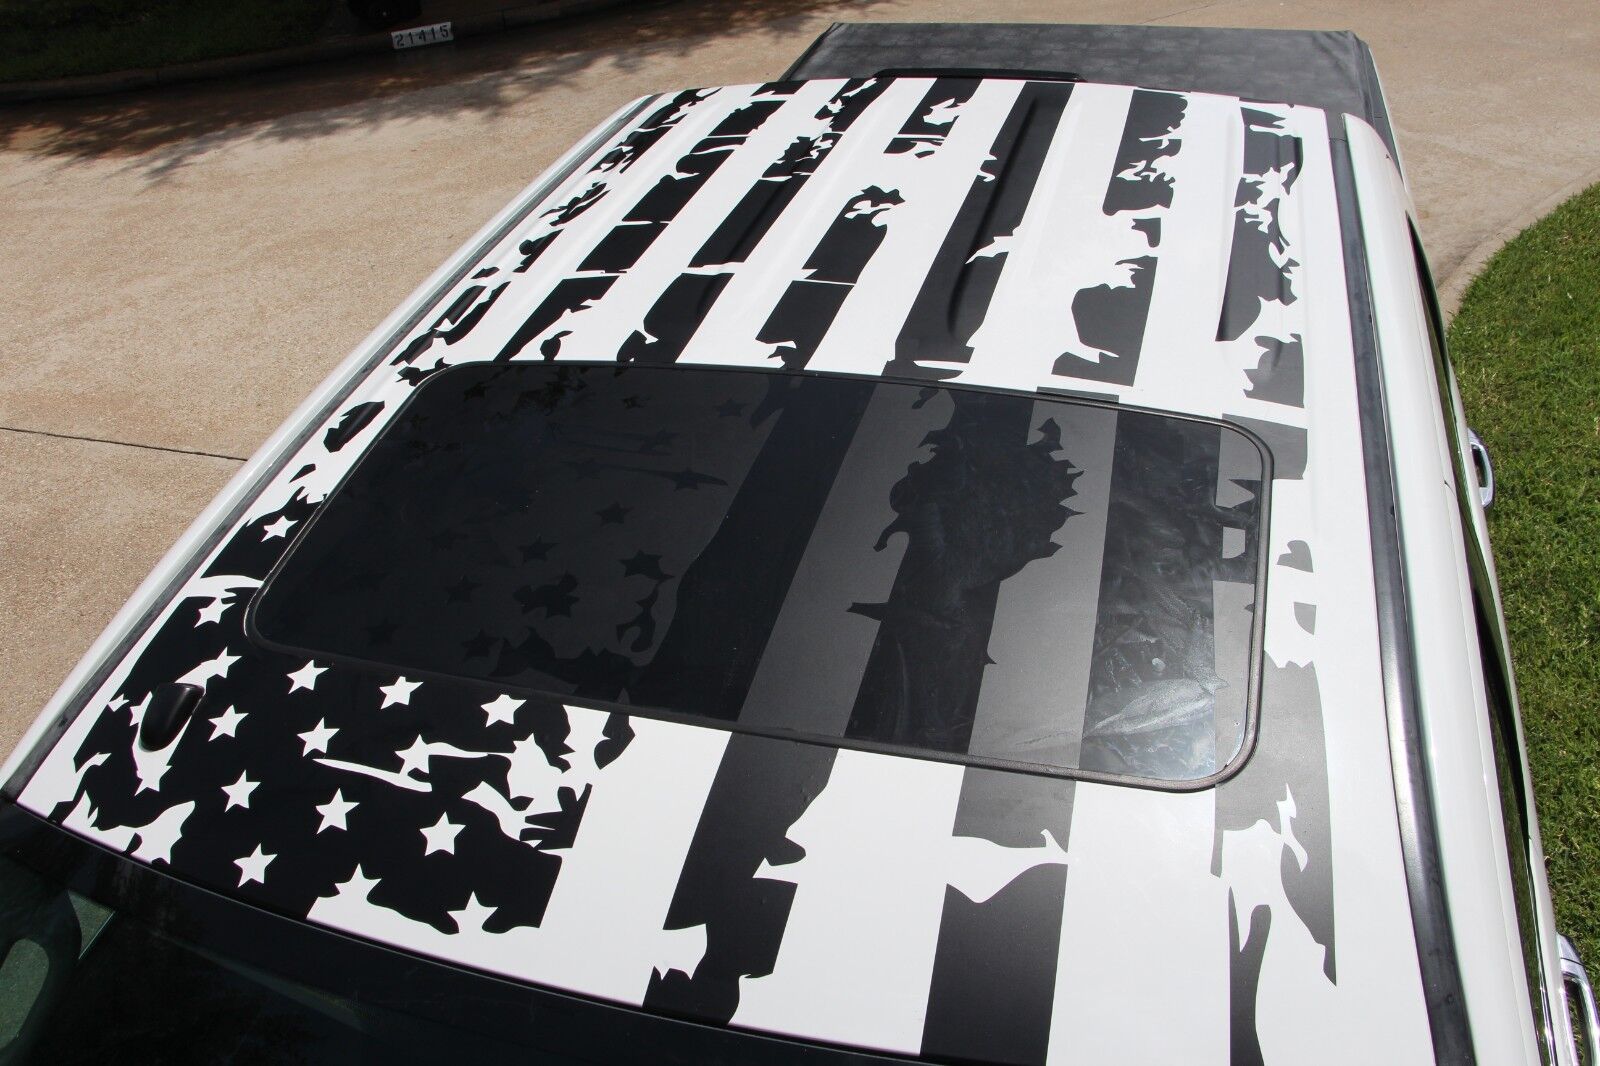 LARGE vinyl sticker AMERICAN FLAG decal for roof, hood, side, rear bed, window